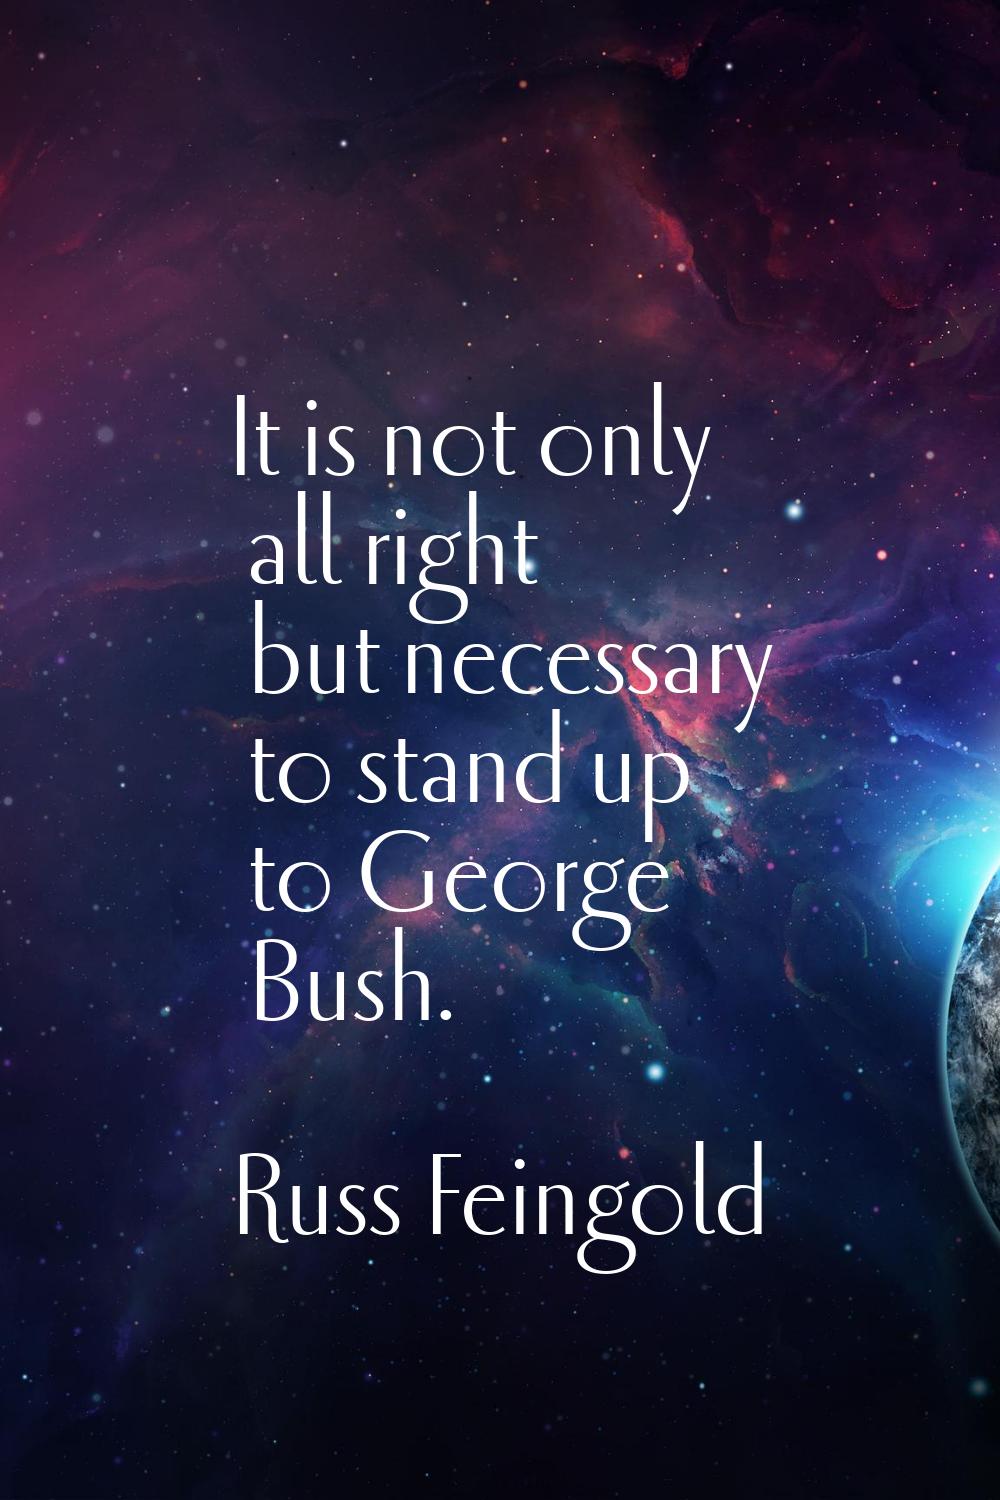 It is not only all right but necessary to stand up to George Bush.